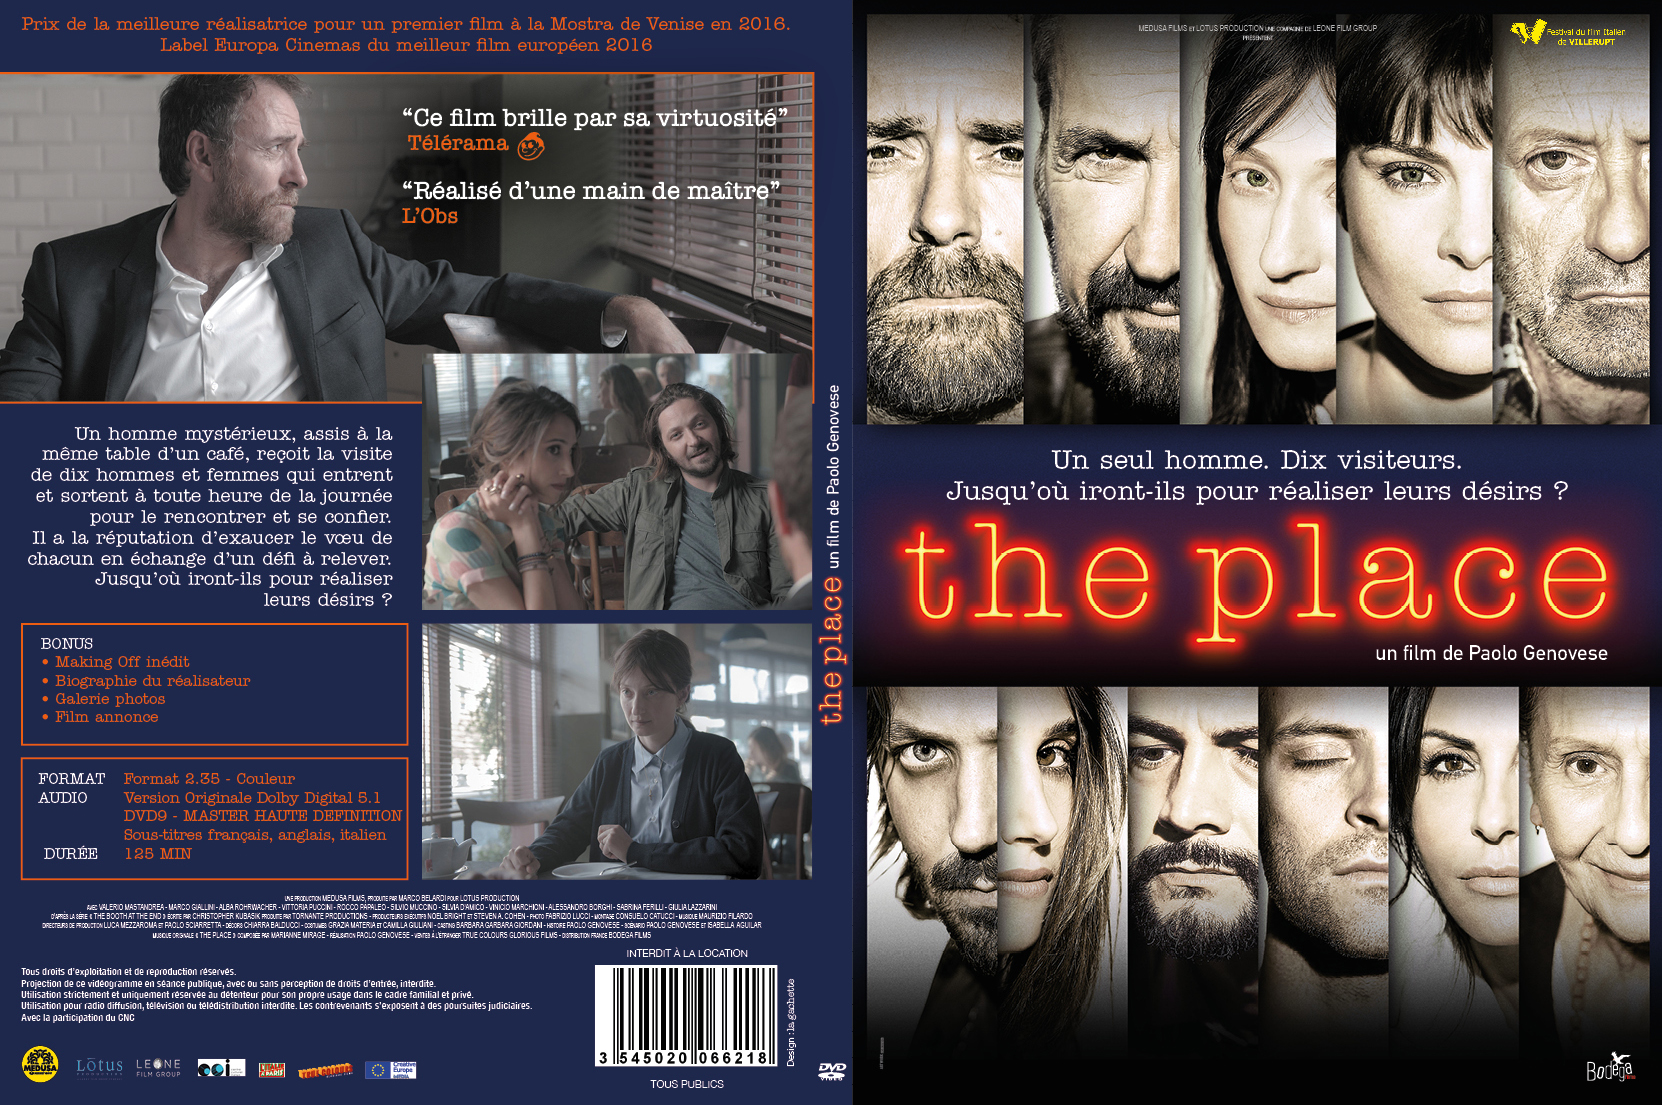 Jaquette DVD The place